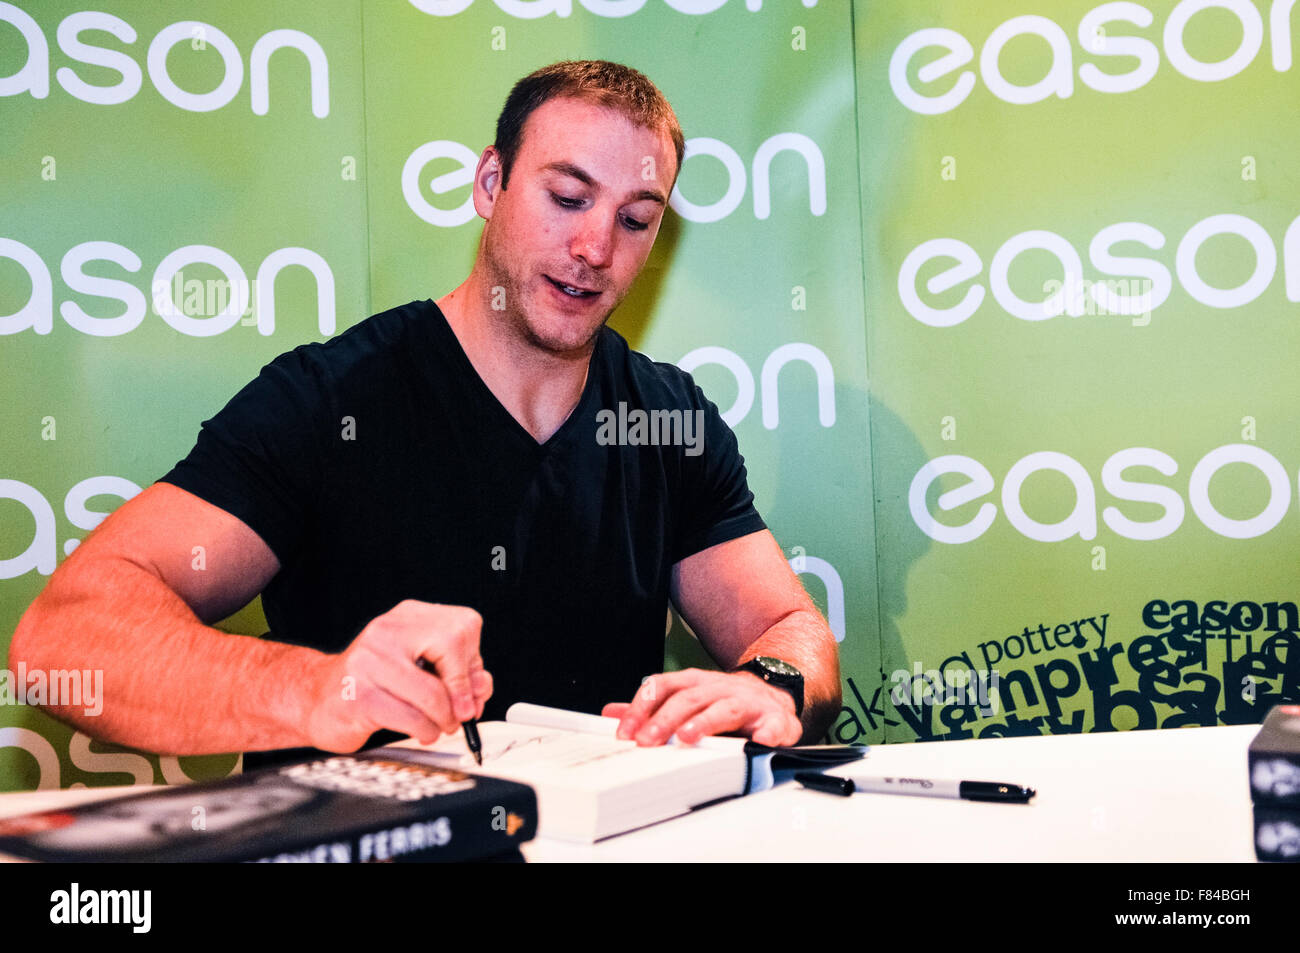 Belfast, Northern Ireland. 05 Dec 2015 - Ulster Rugby player Stephen Ferris signs his latest book in Belfast Credit:  Stephen Barnes/Alamy Live News Stock Photo